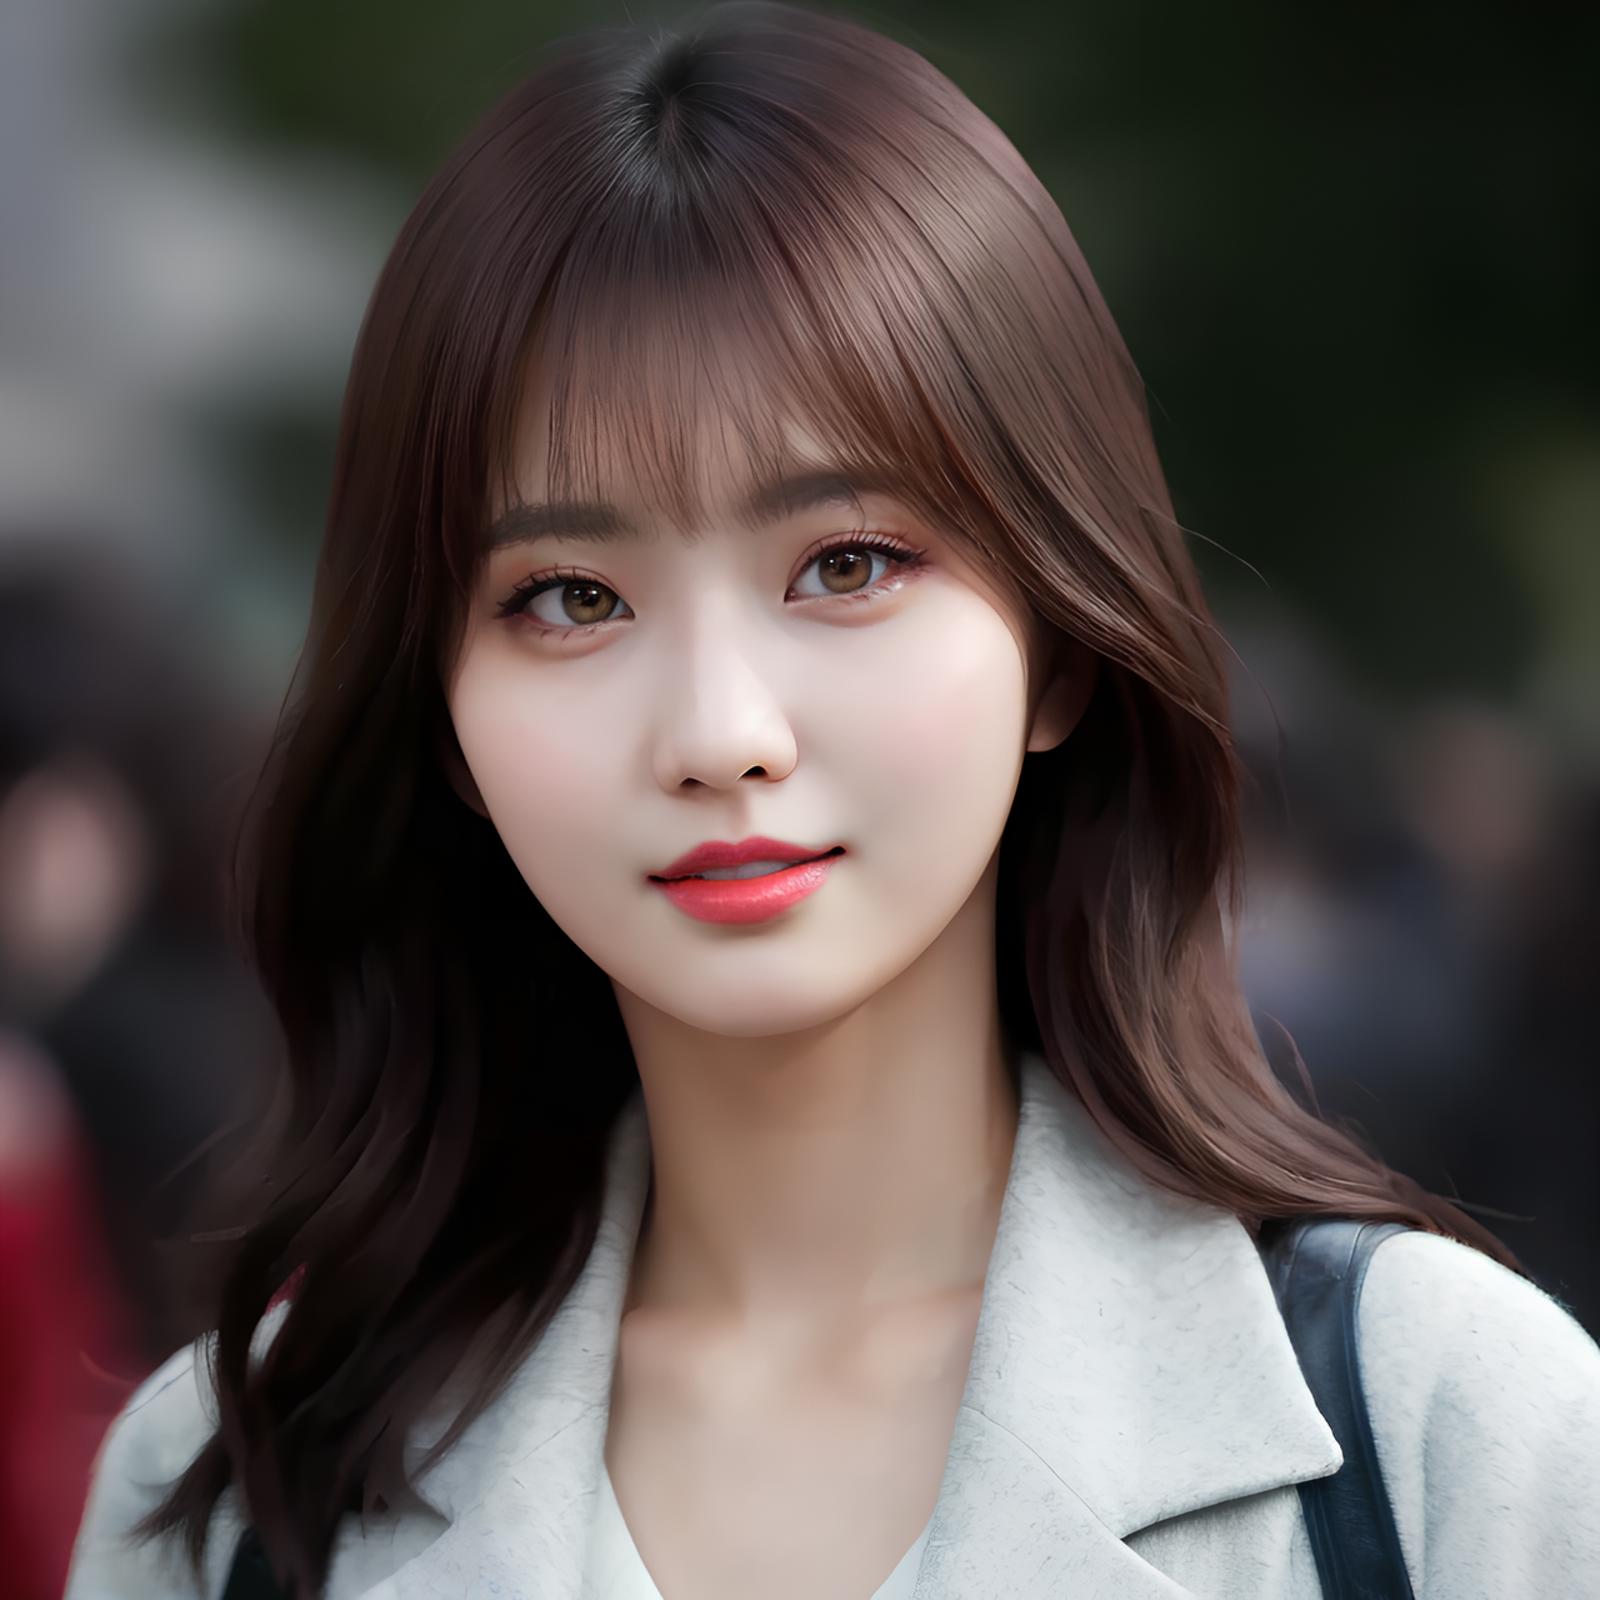 Not Twice - Momo image by Tissue_AI